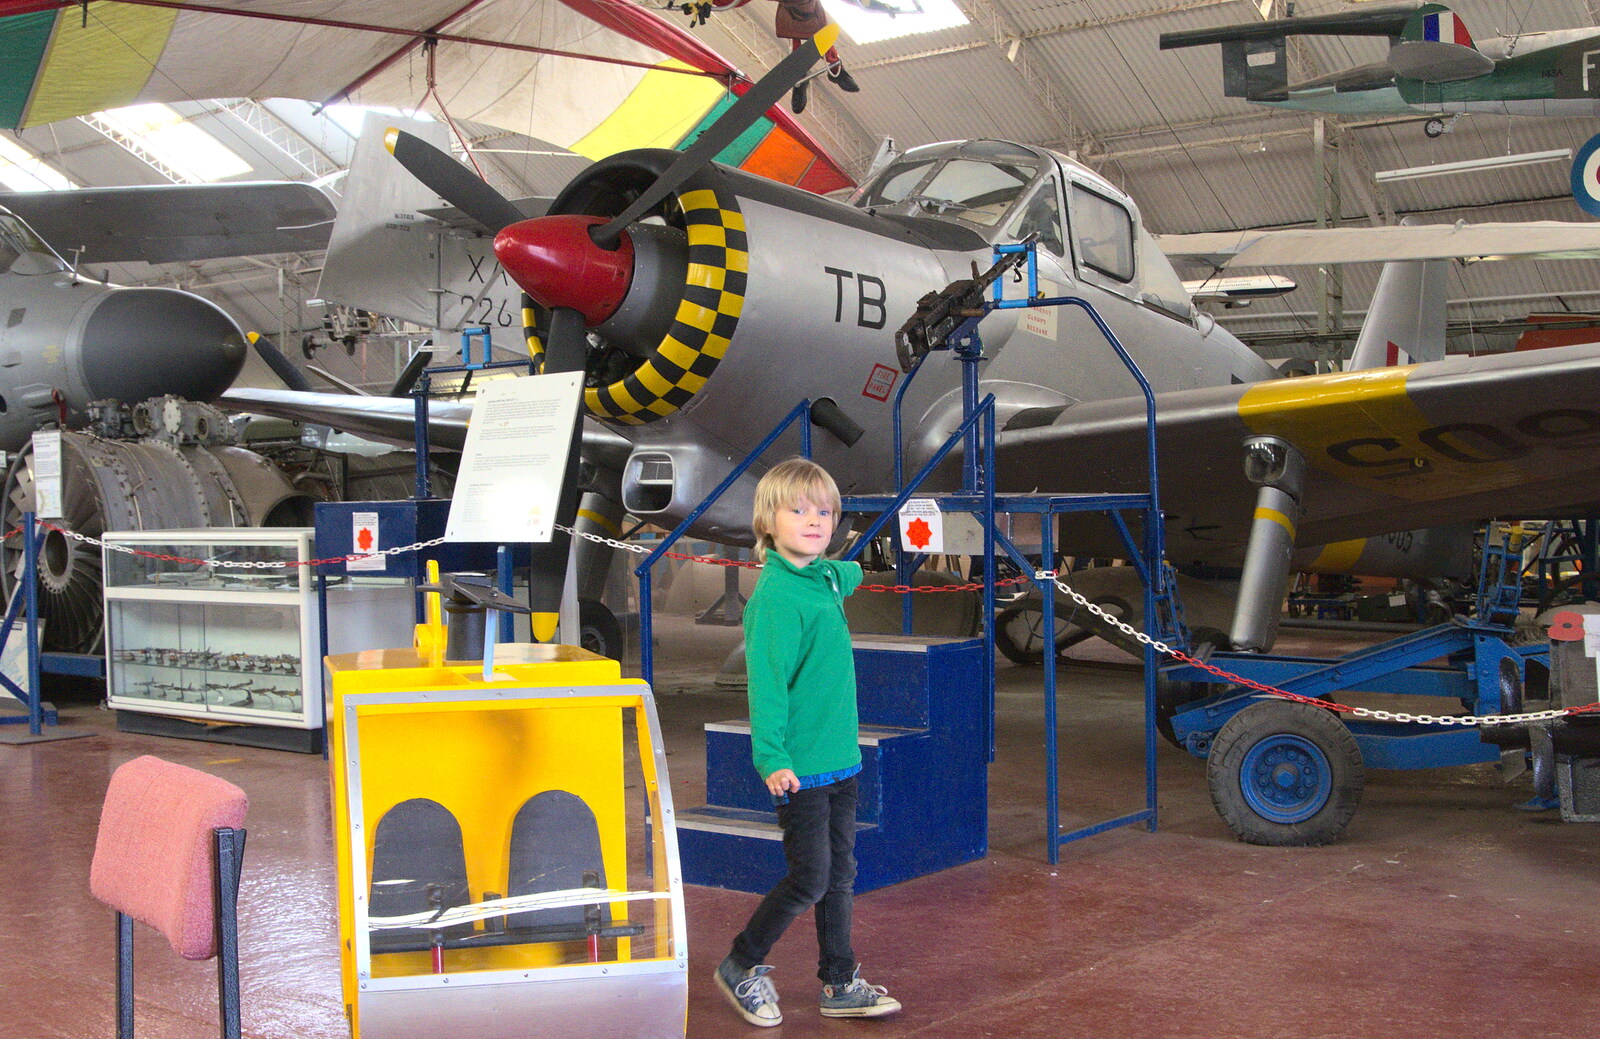 Harry points from Norfolk and Suffolk Aviation Museum, Flixton, Suffolk - 30th April 2017